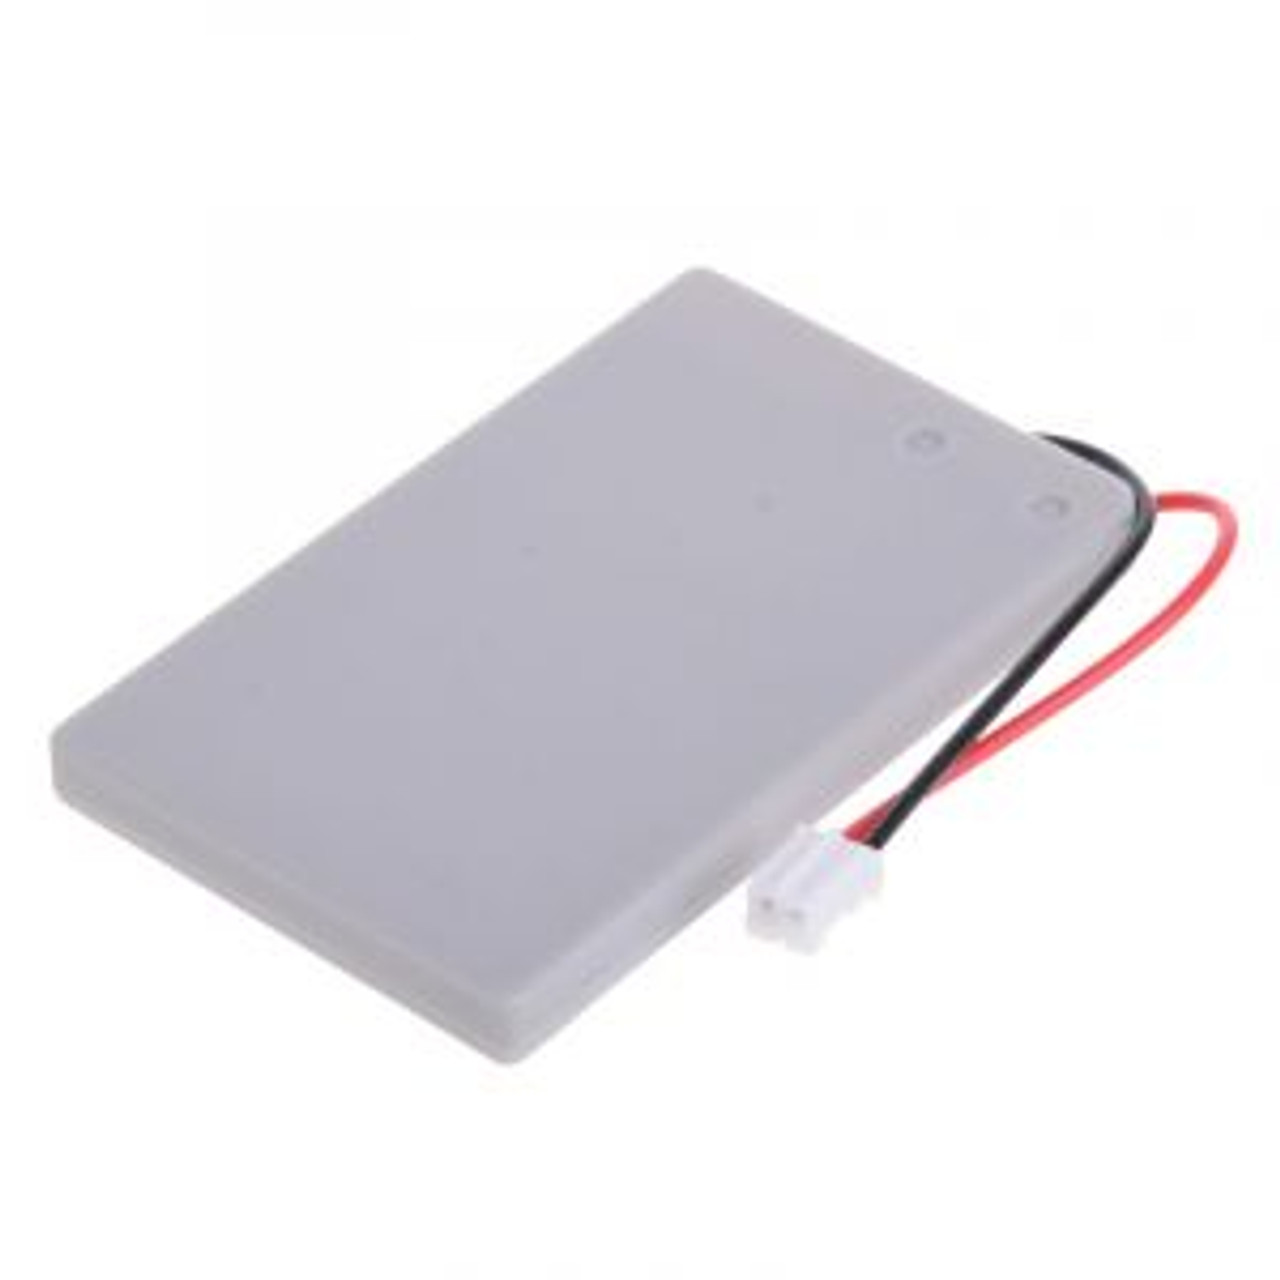 815984-001 HP 12w Megacell Storage Battery for Smart Ar